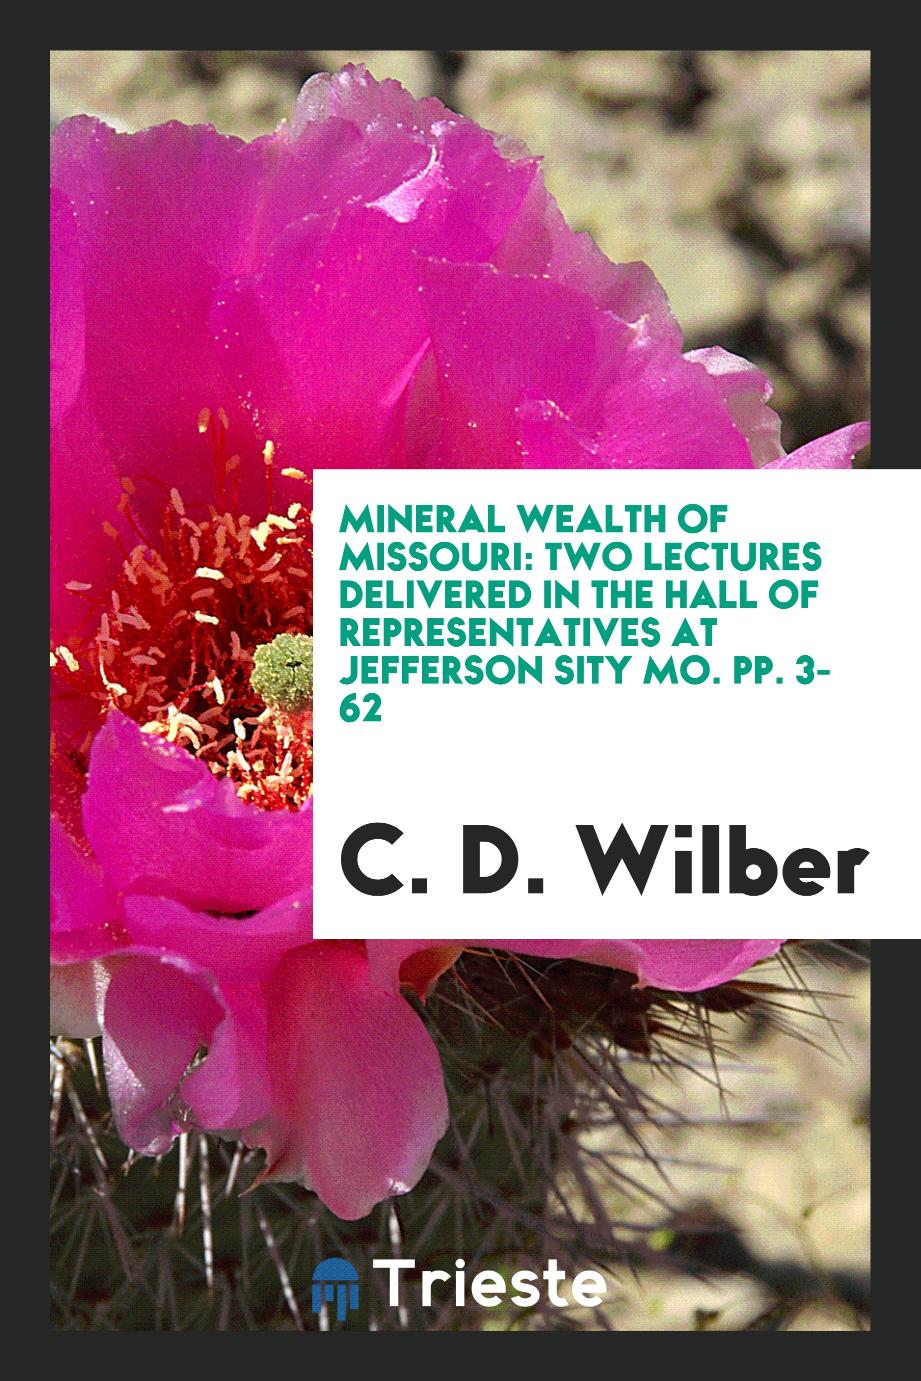 Mineral Wealth of Missouri: Two Lectures Delivered in the Hall of Representatives at Jefferson sity mo. pp. 3-62